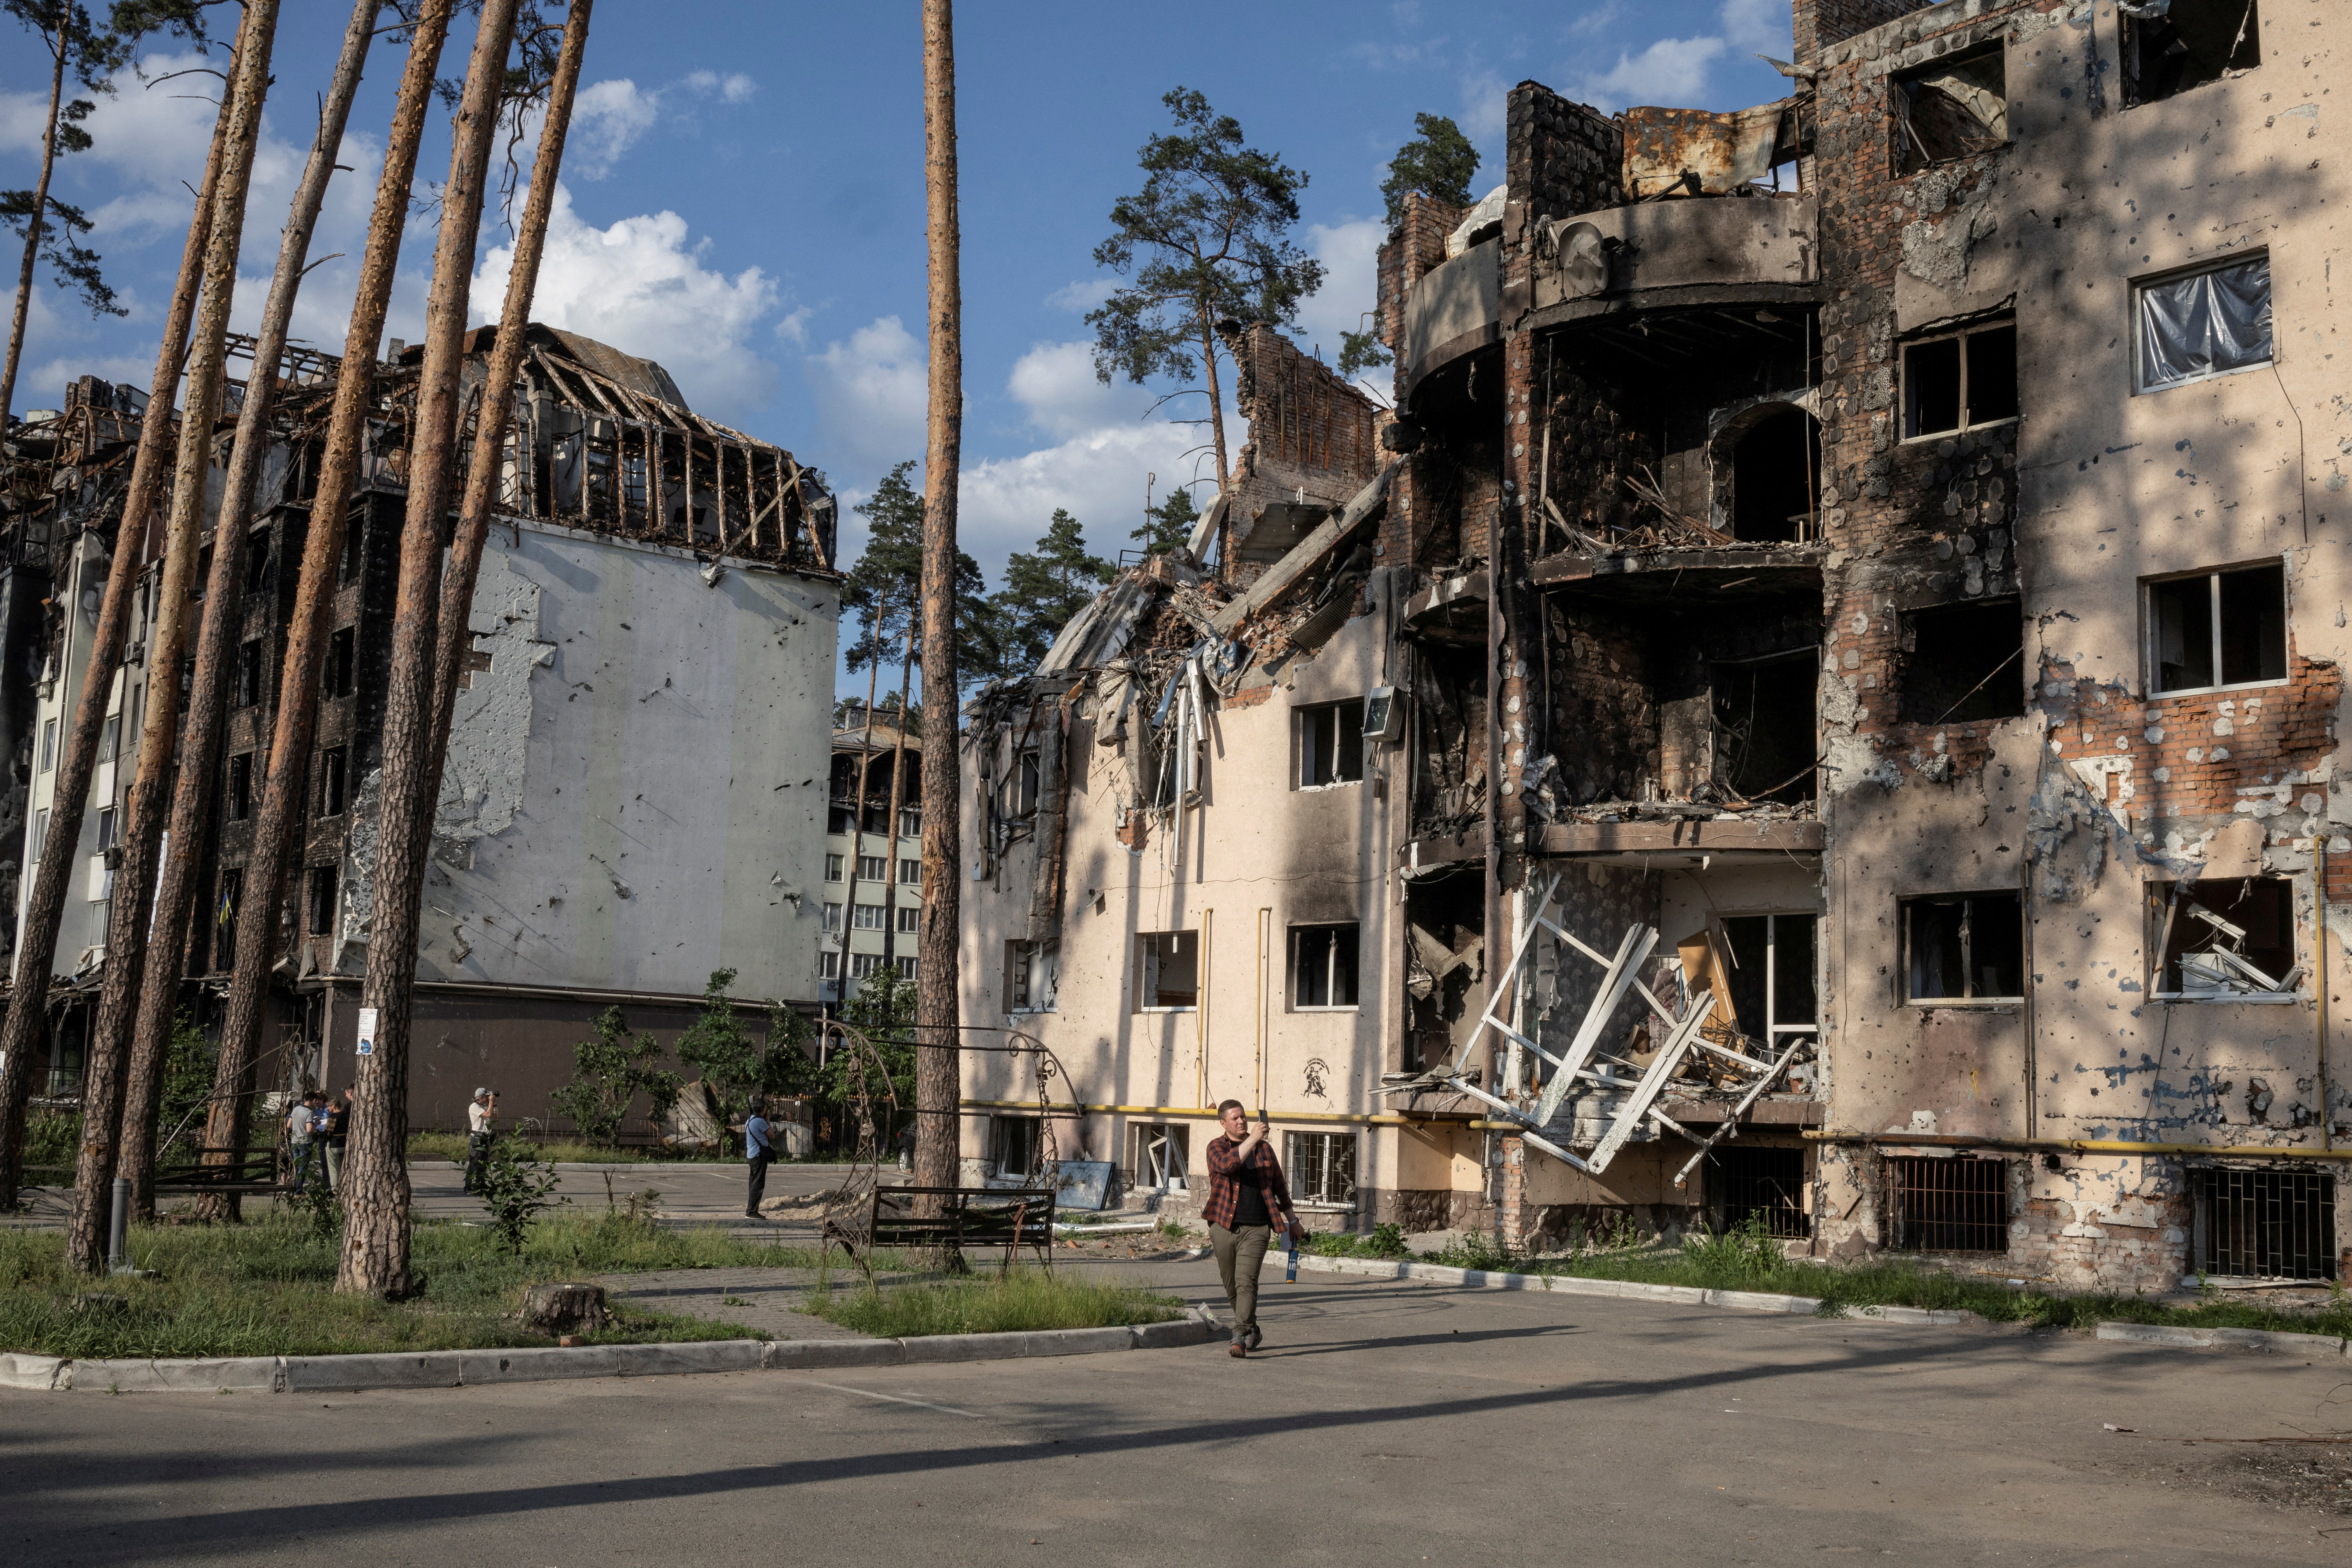 People look at destroyed buildings in Irpin, outside Kyiv, as Russia's attacks on Ukraine continues